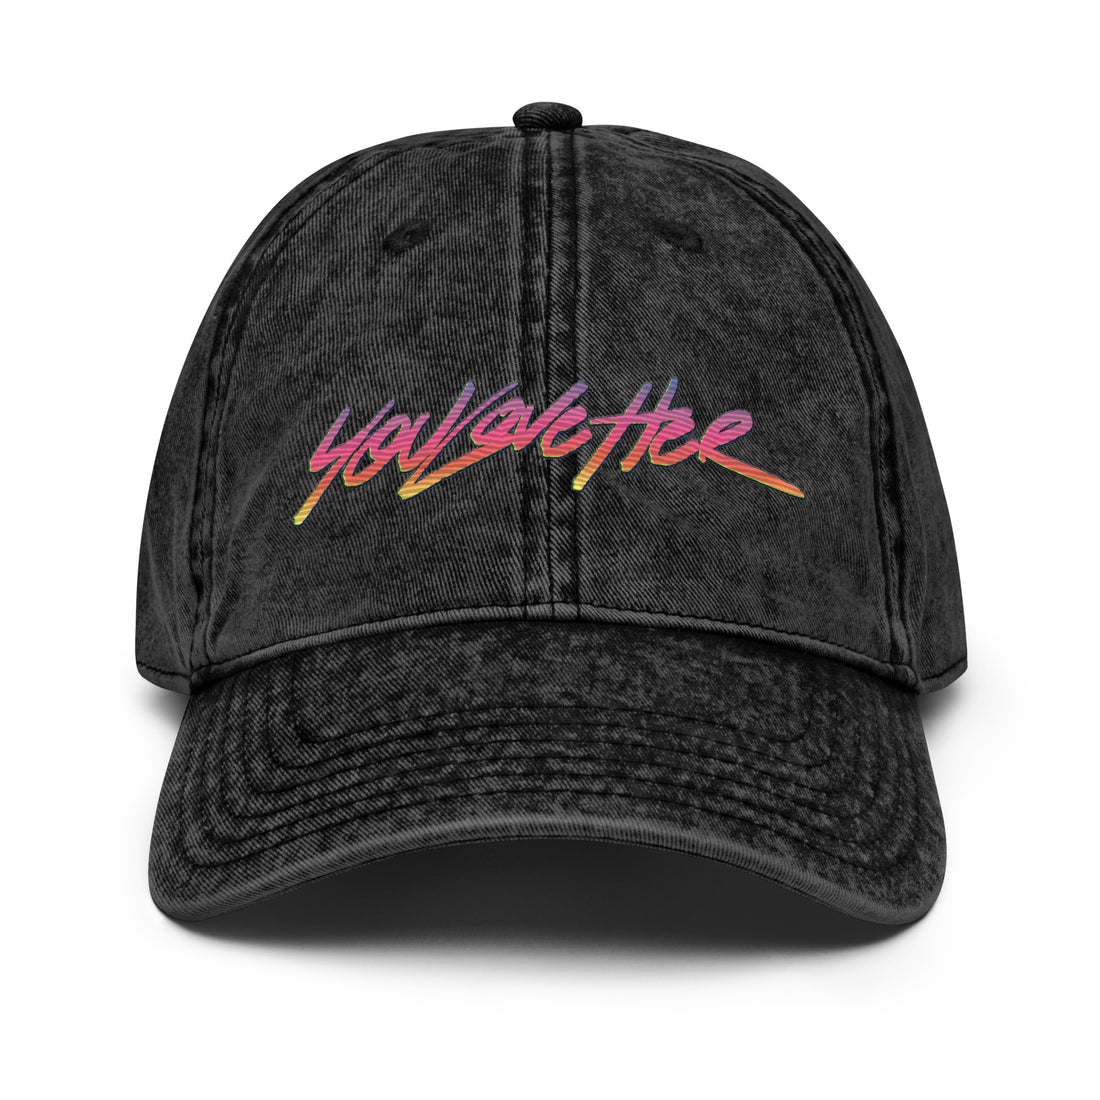 YOU LOVE HER - SYNTHWAVE LOGO Vintage Cotton Twill Cap